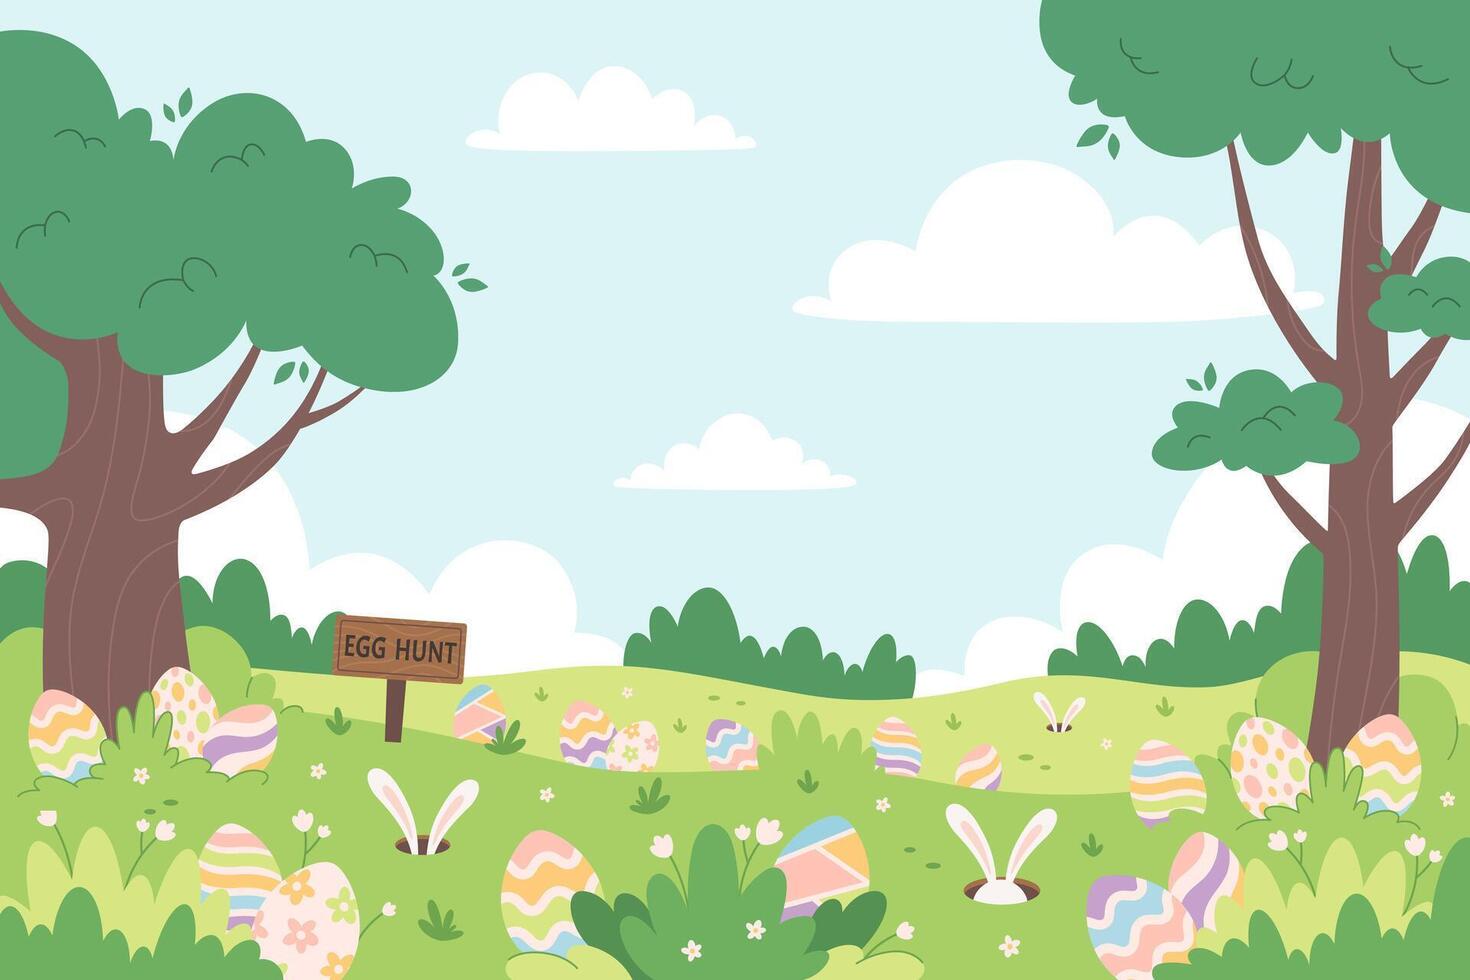 Spring meadow with hidden eggs for Easter egg hunt. Easter Event Celebration in Spring Park. Holiday tradition game for children vector